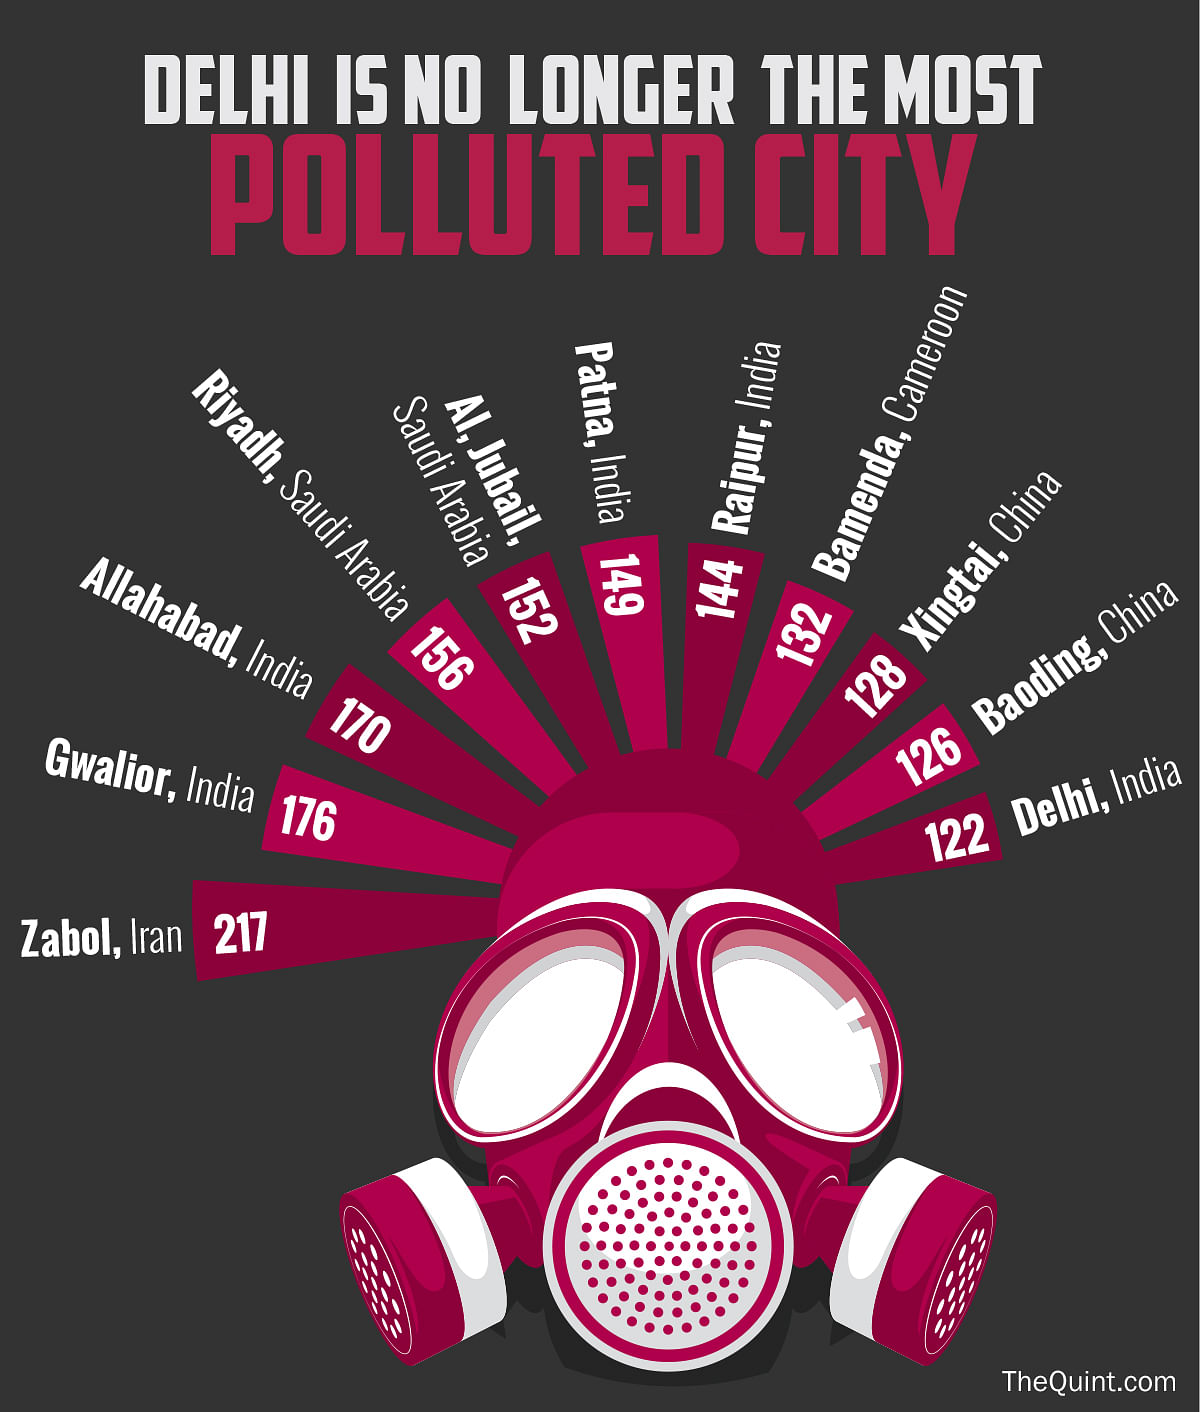 Delhi is not the most polluted city in the world anymore. (Photo: Rahul Gupta/<b>The Quint</b>)